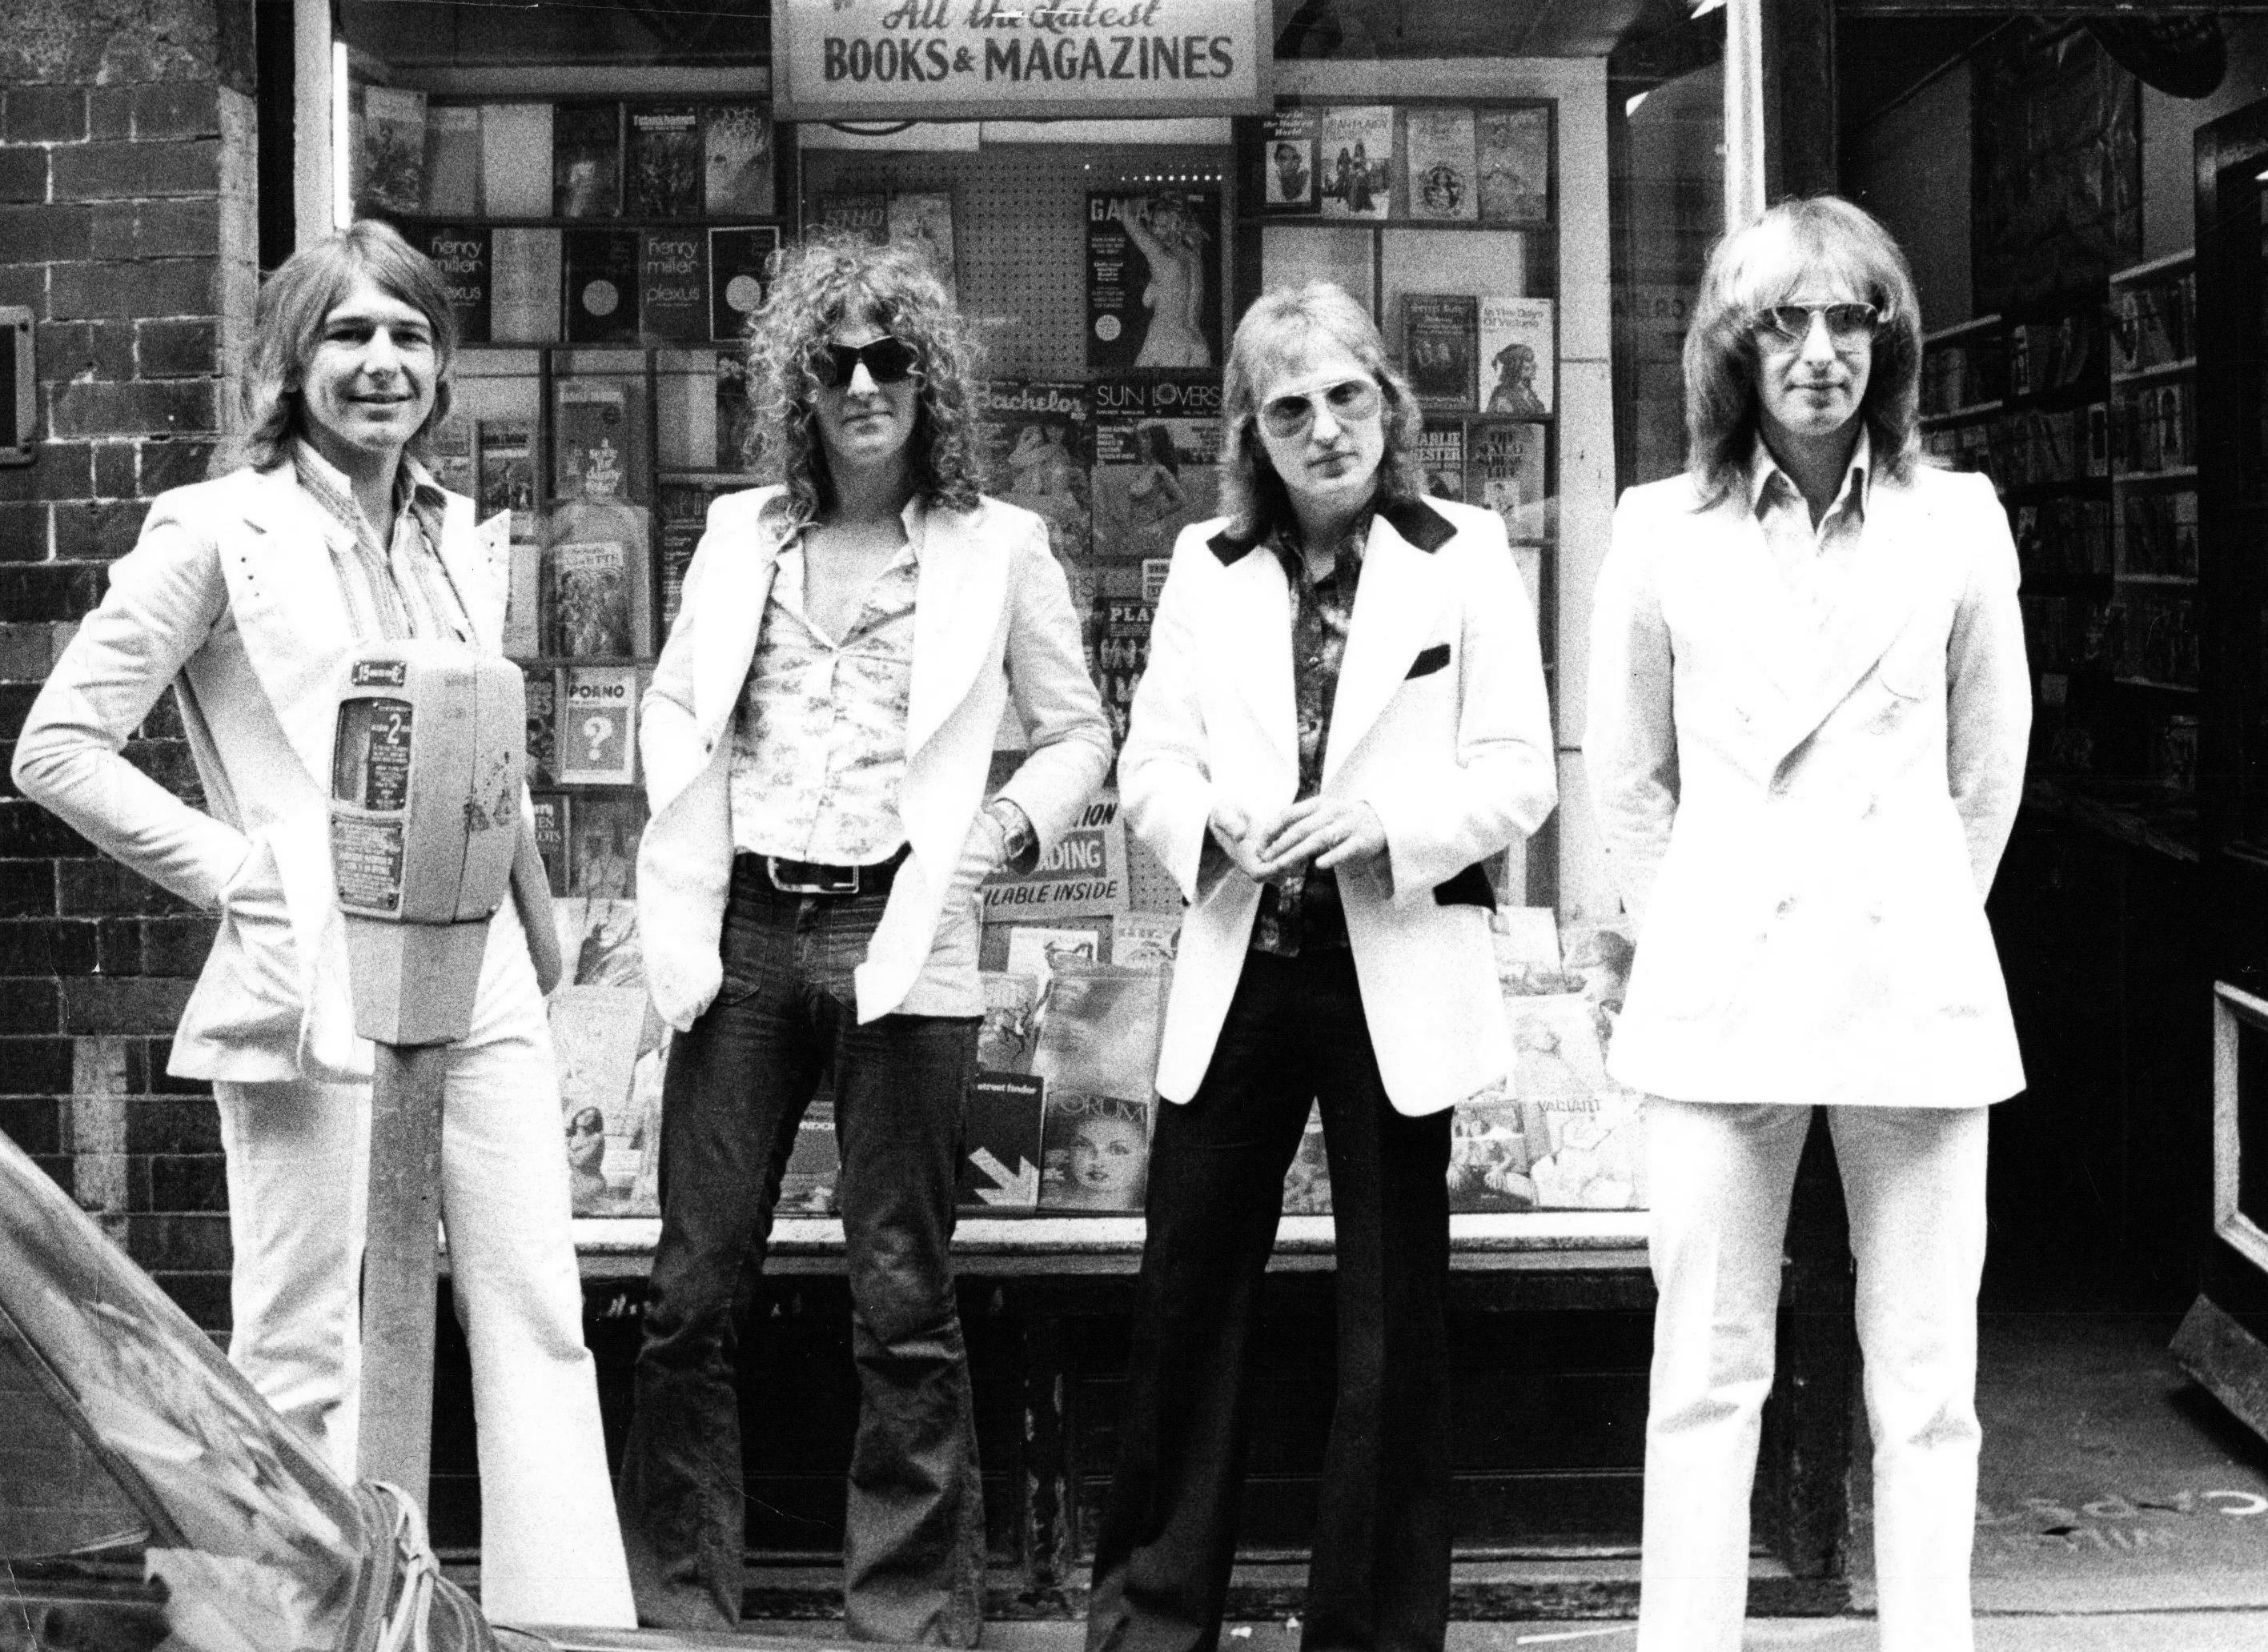 Chris Walter Black and White Photograph - Mott the Hoople Candid on the Street Vintage Original Photograph